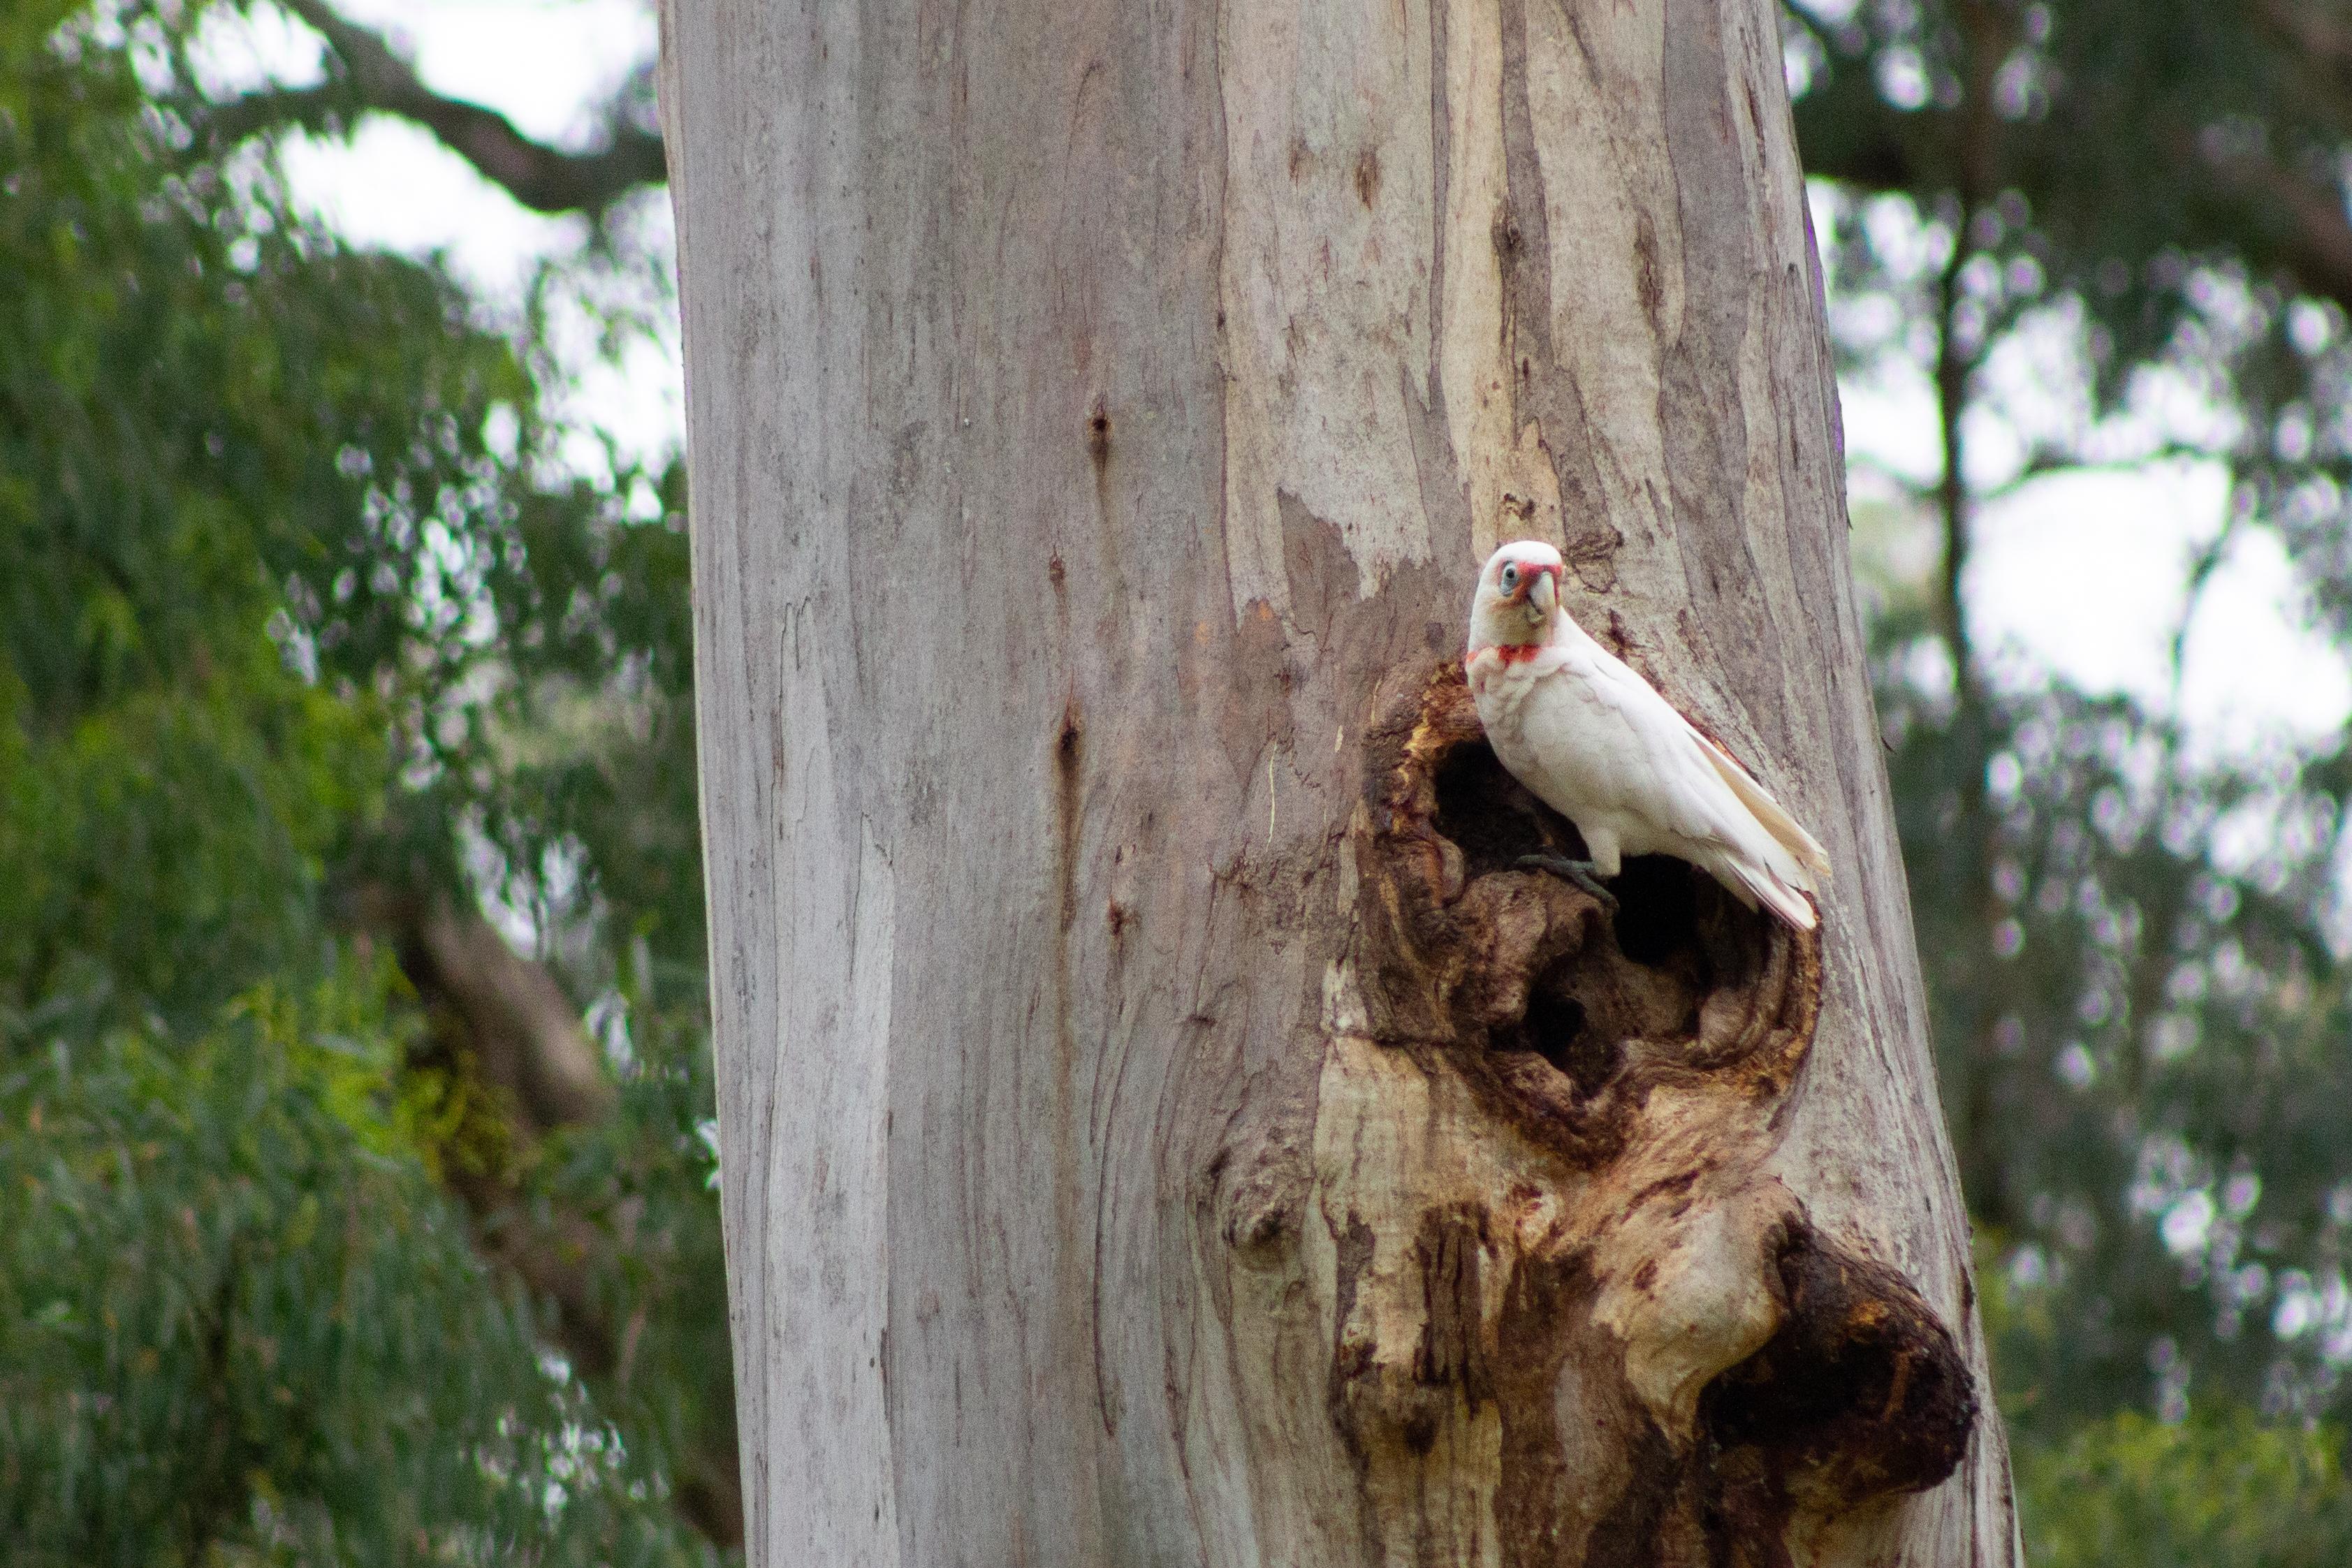 White bird with red markings sits in hollow of a large gum tree